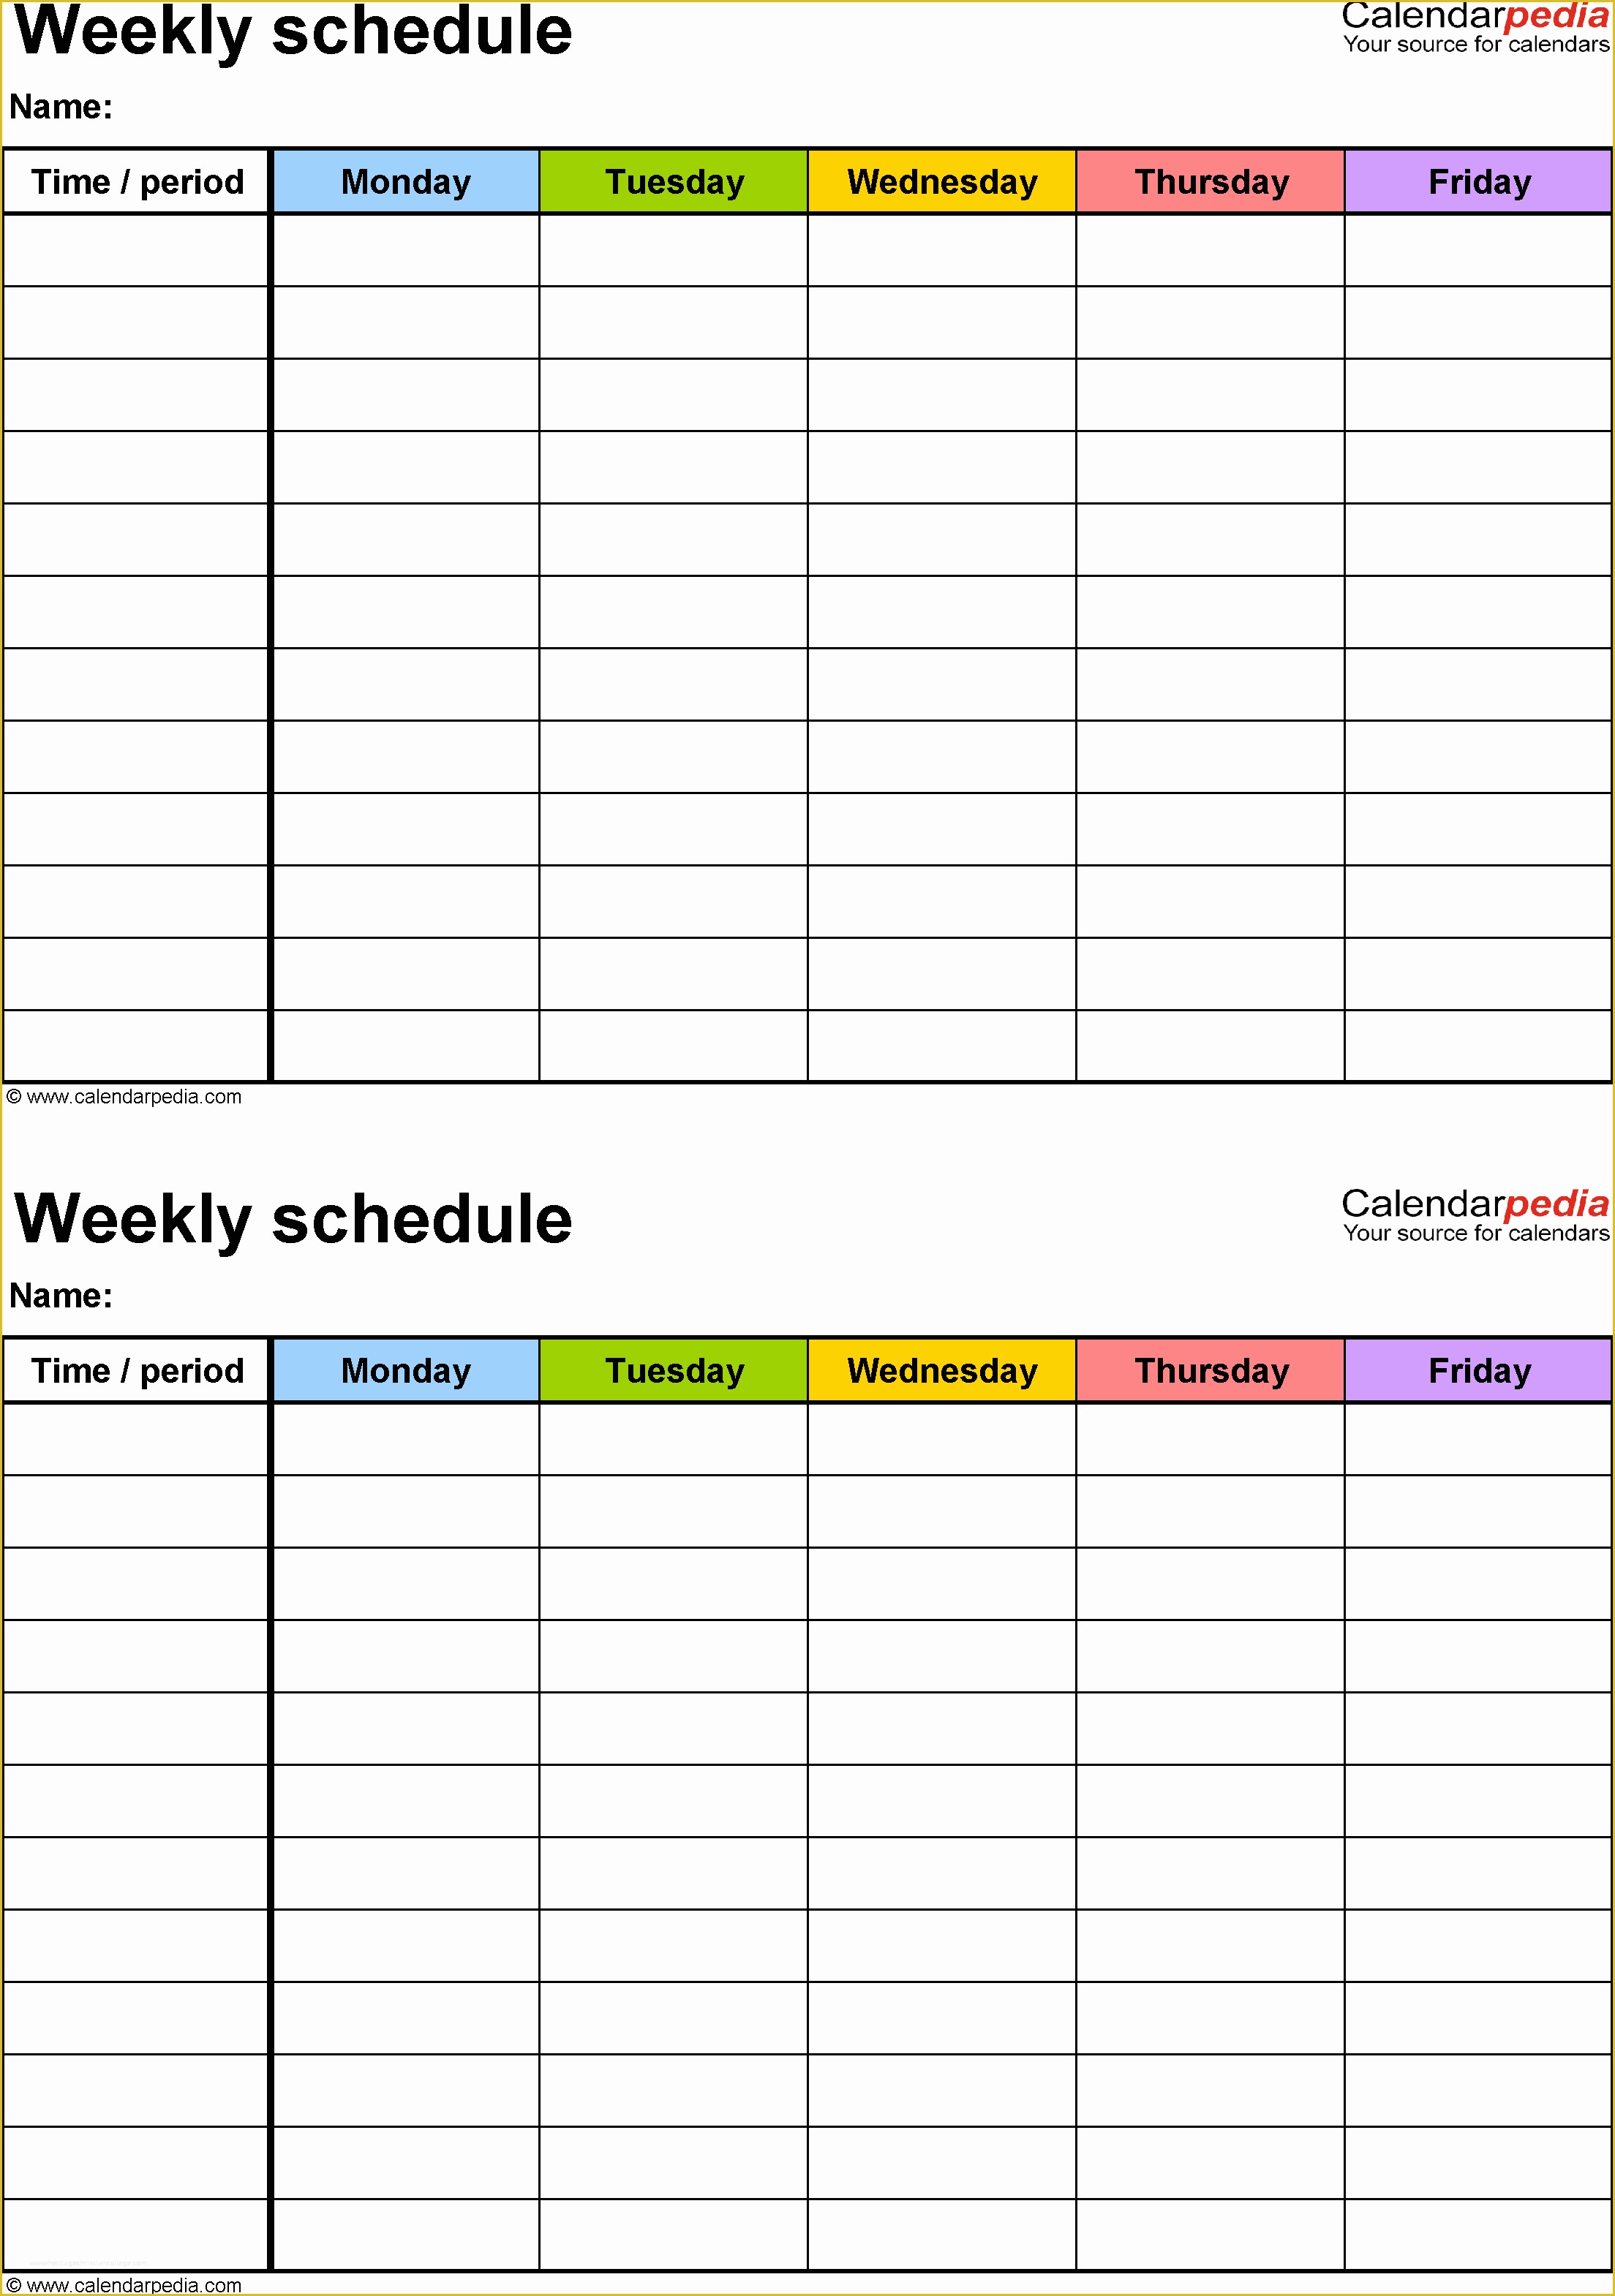 Free Time Schedule Template Of Weekly Calendar Maker